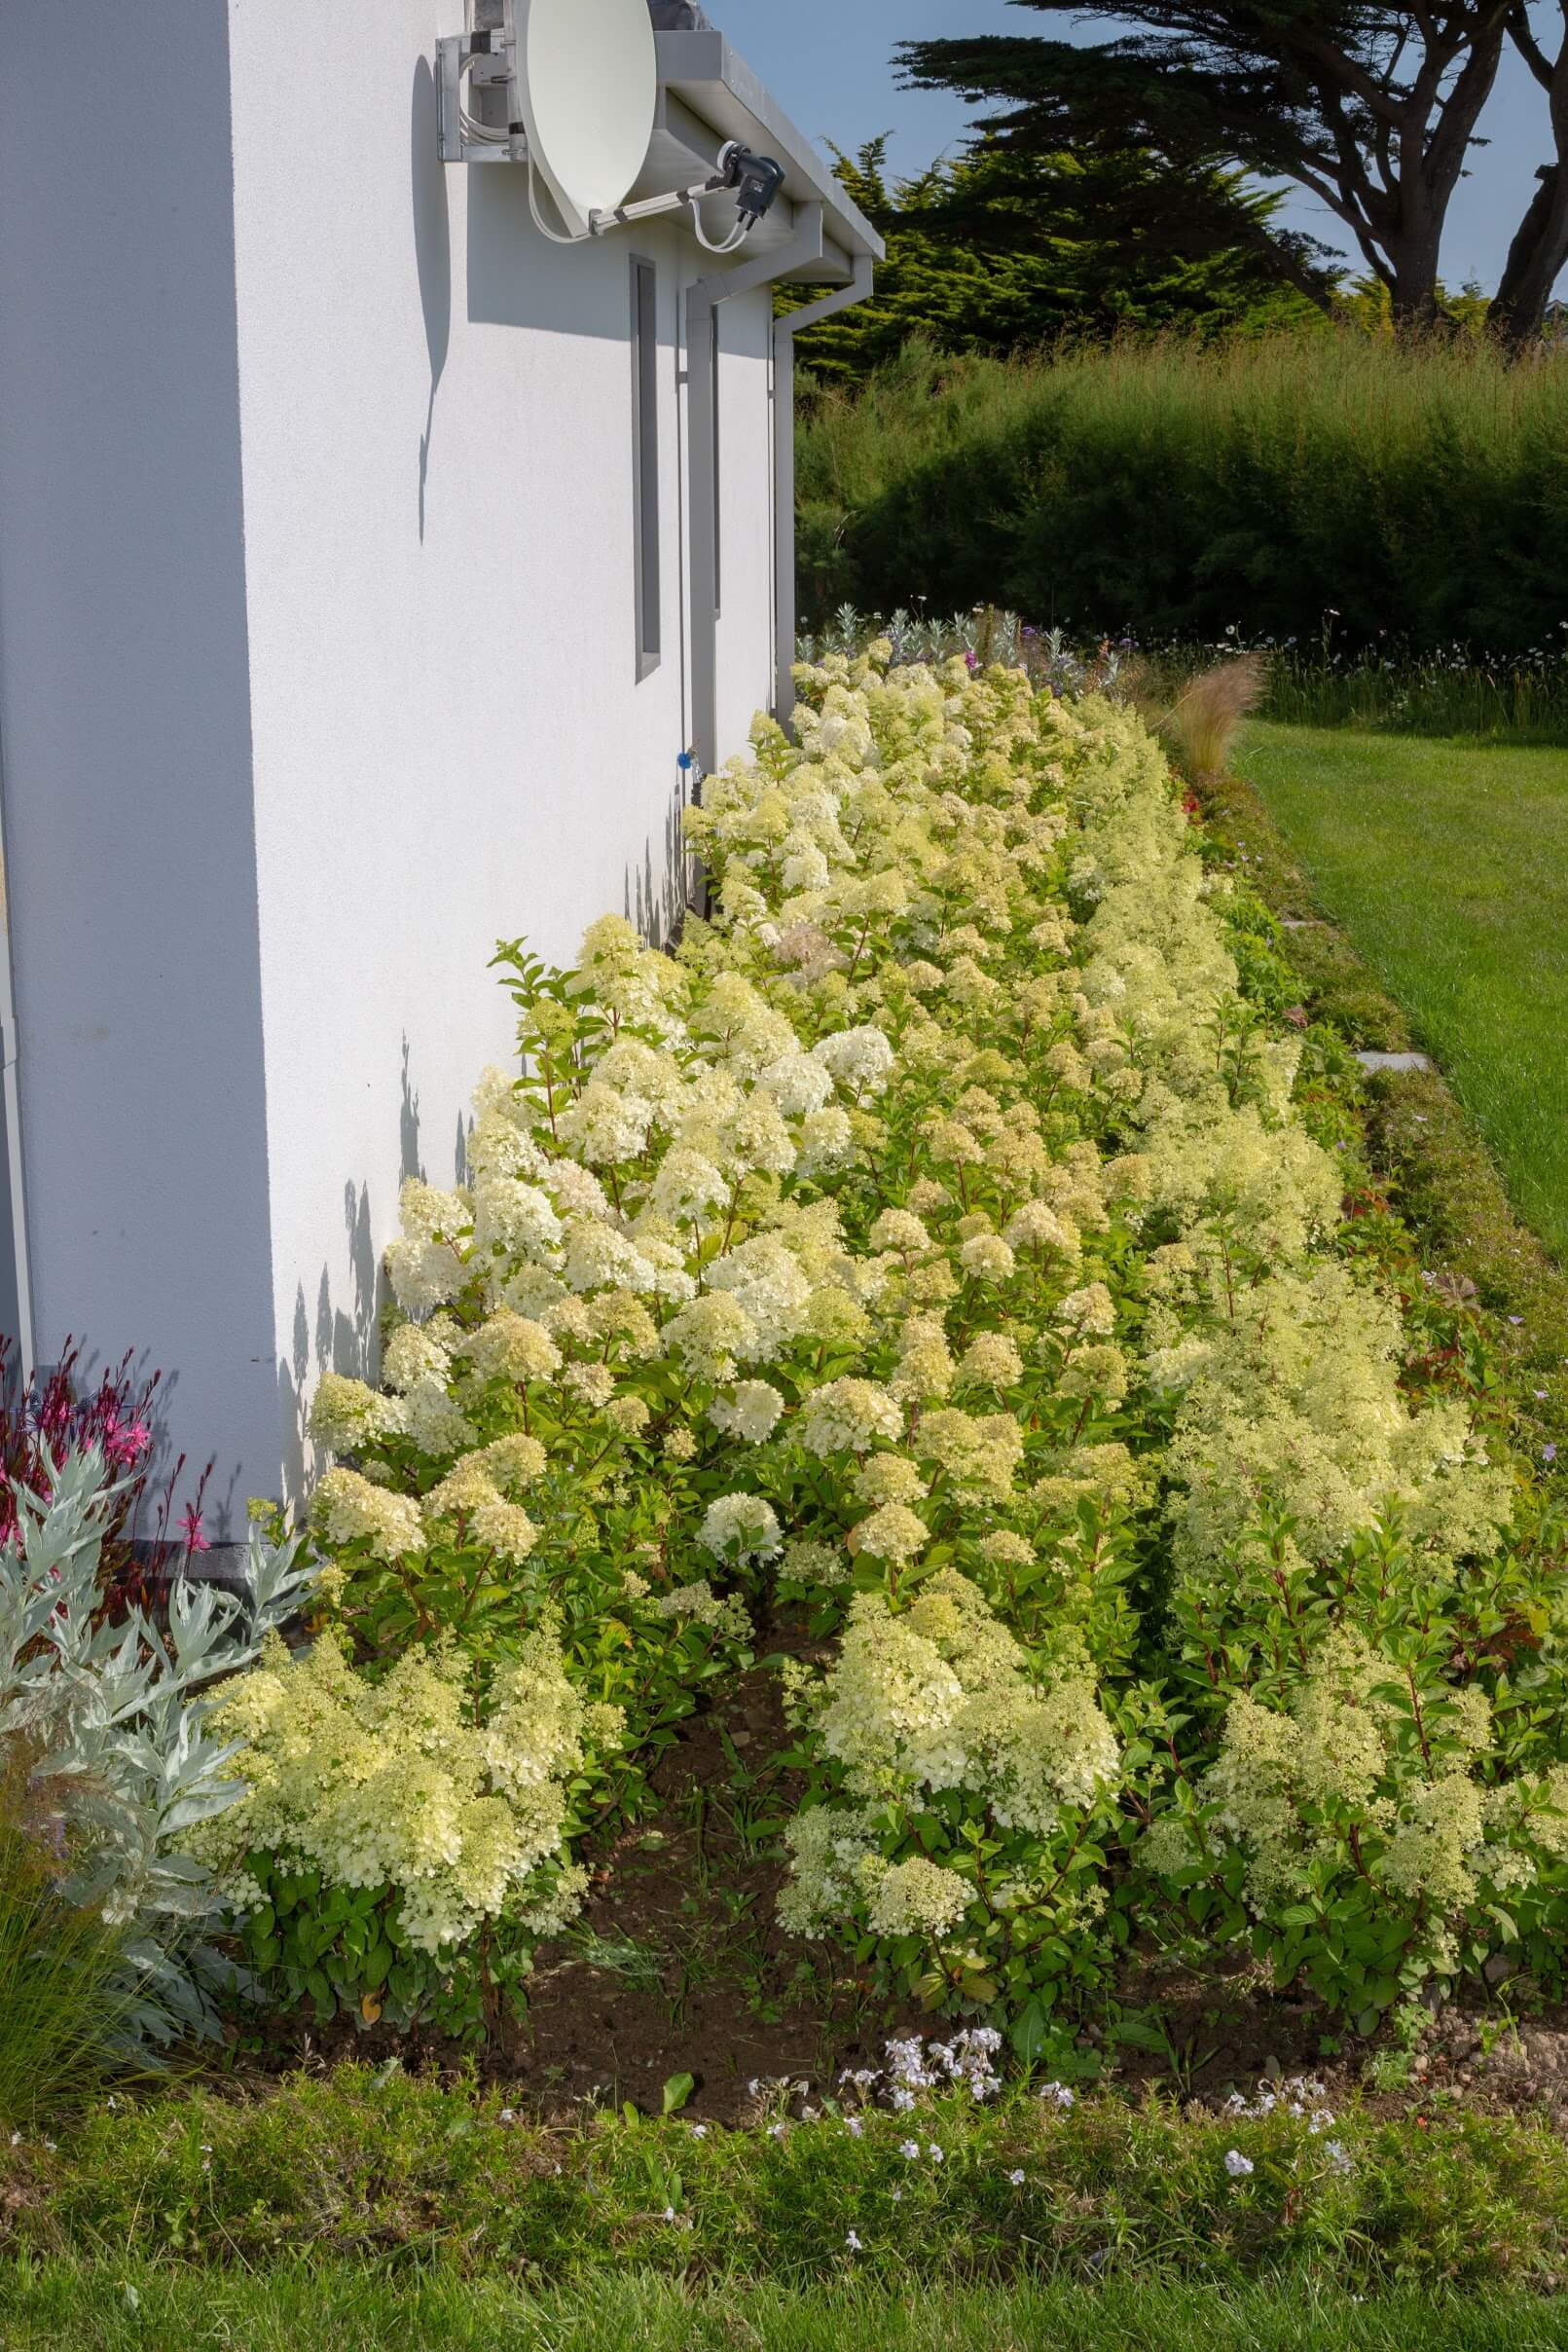 Cornwall Garden planting in sherbet colours